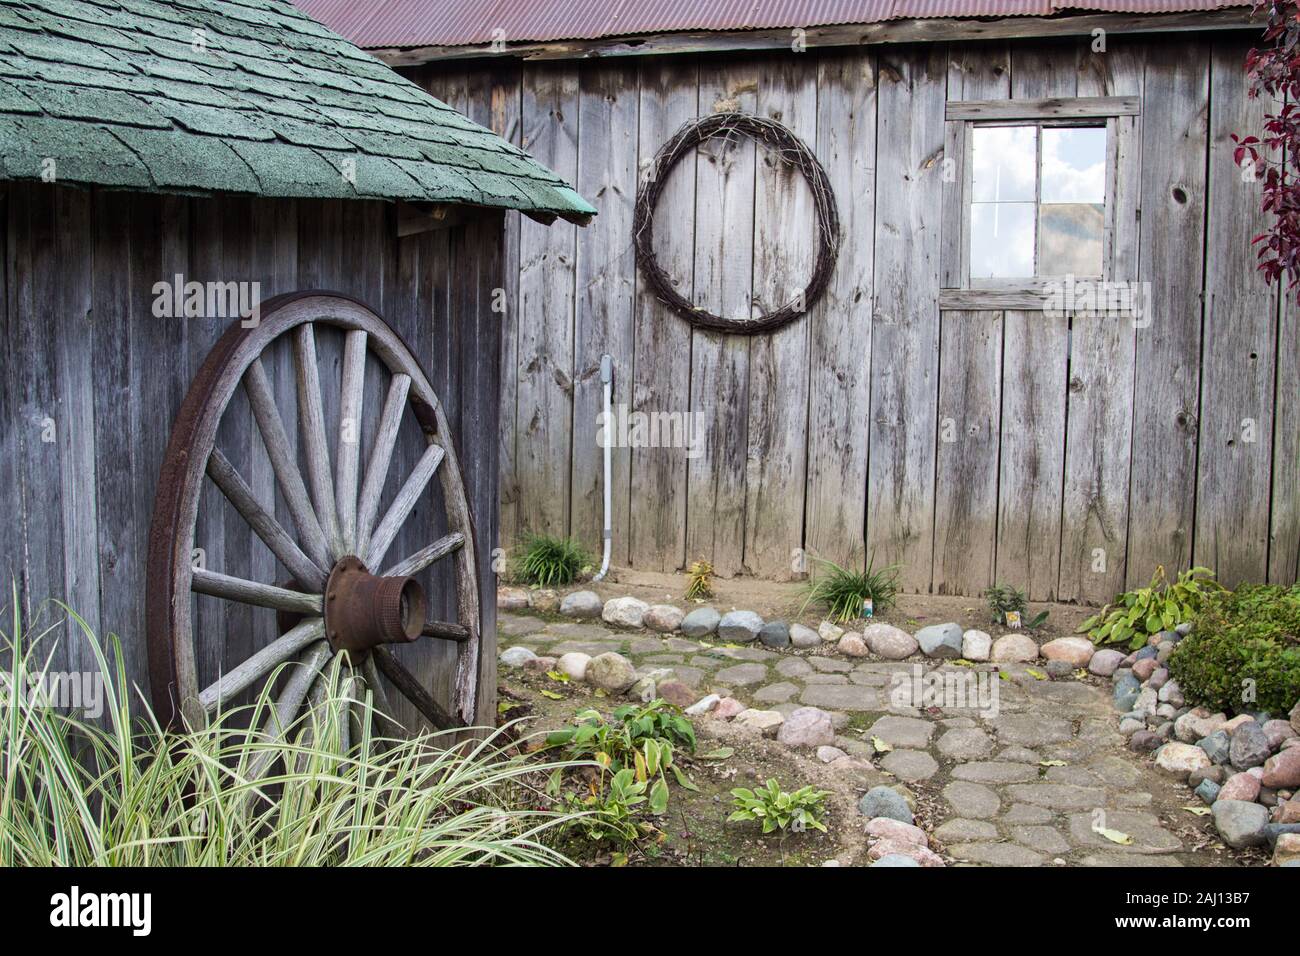 Country Garden Shed. Winding stone path among gardeners shed and outbuildings. Stock Photo